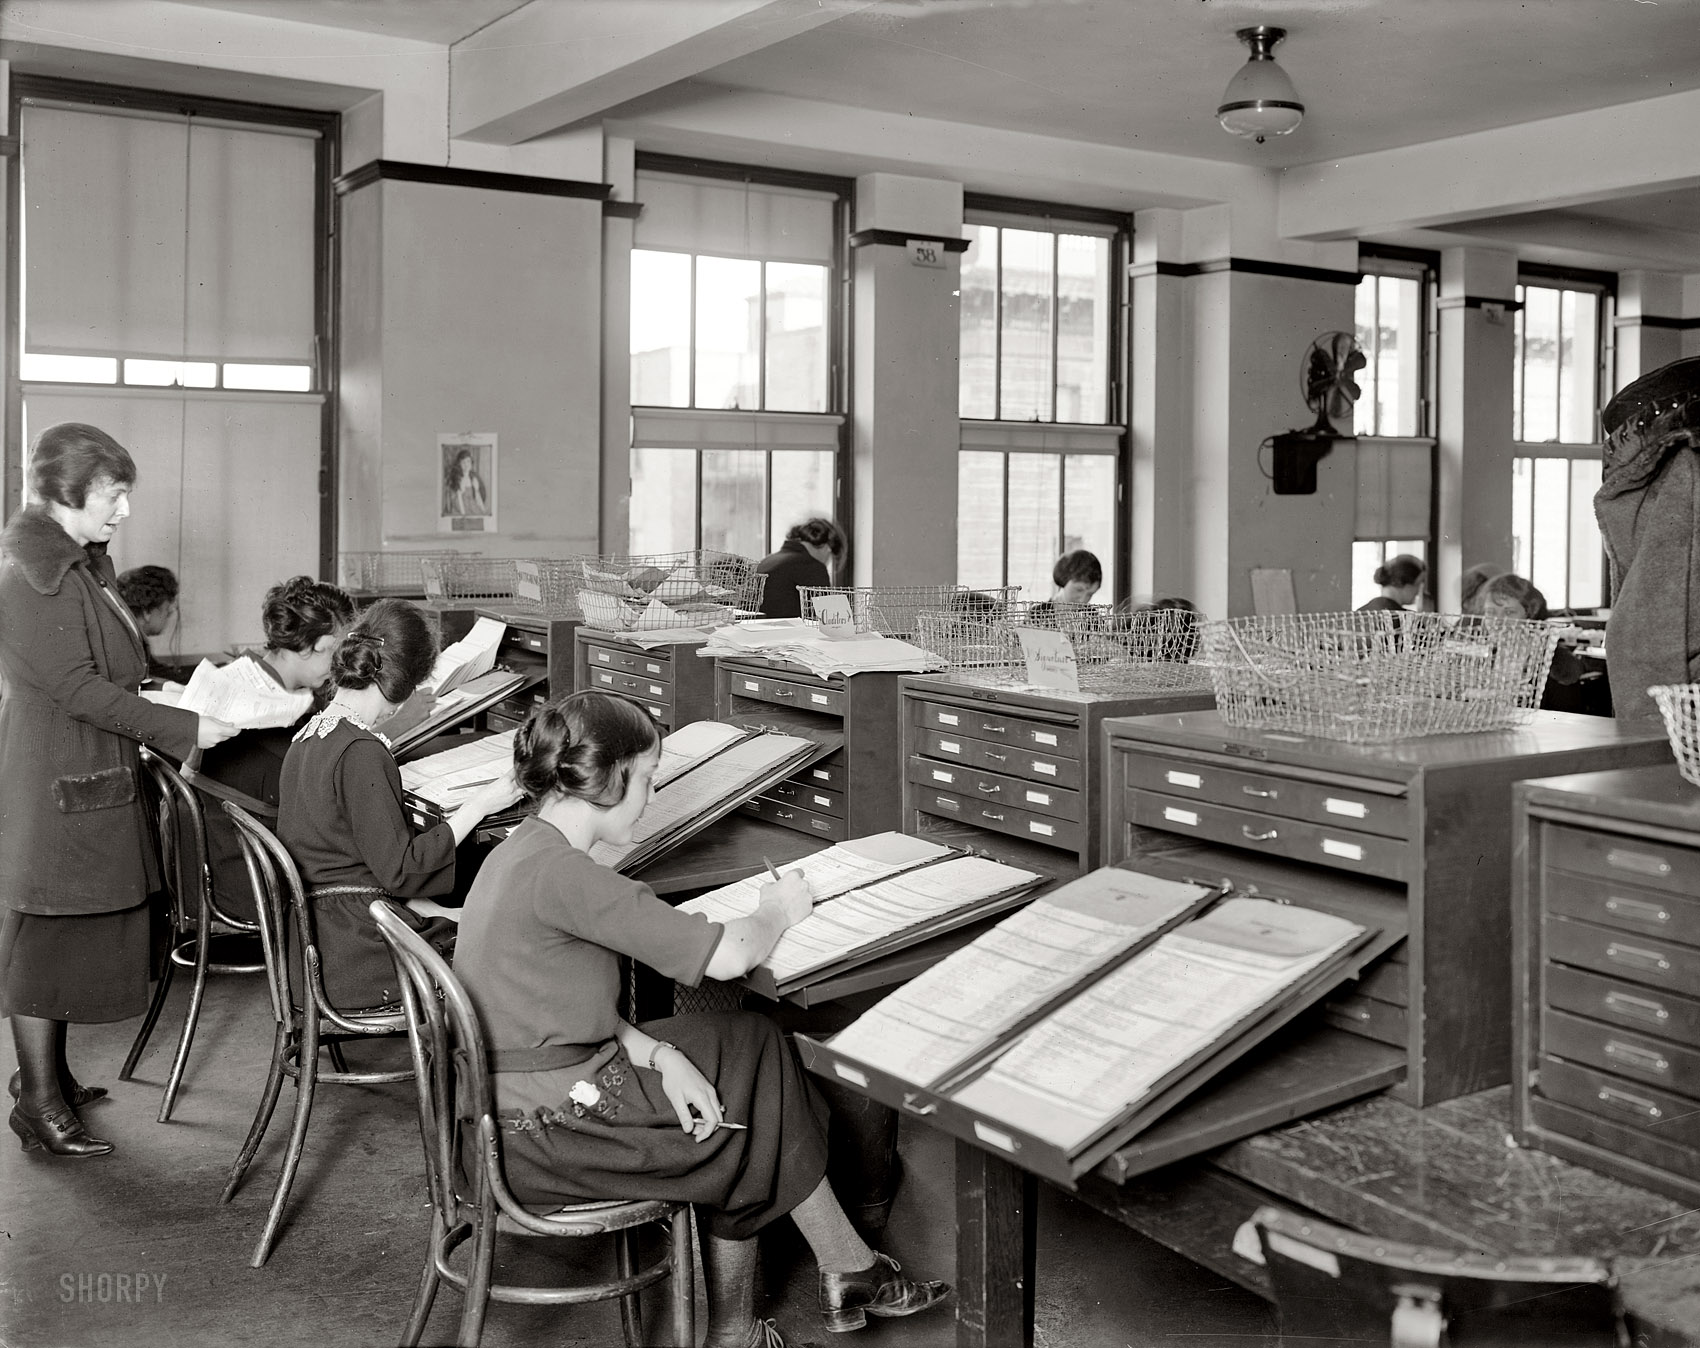 Washington, D.C., circa 1921. "Acme Card System Co." The first of several visits we'll be making. National Photo Co. Collection glass negative. View full size.